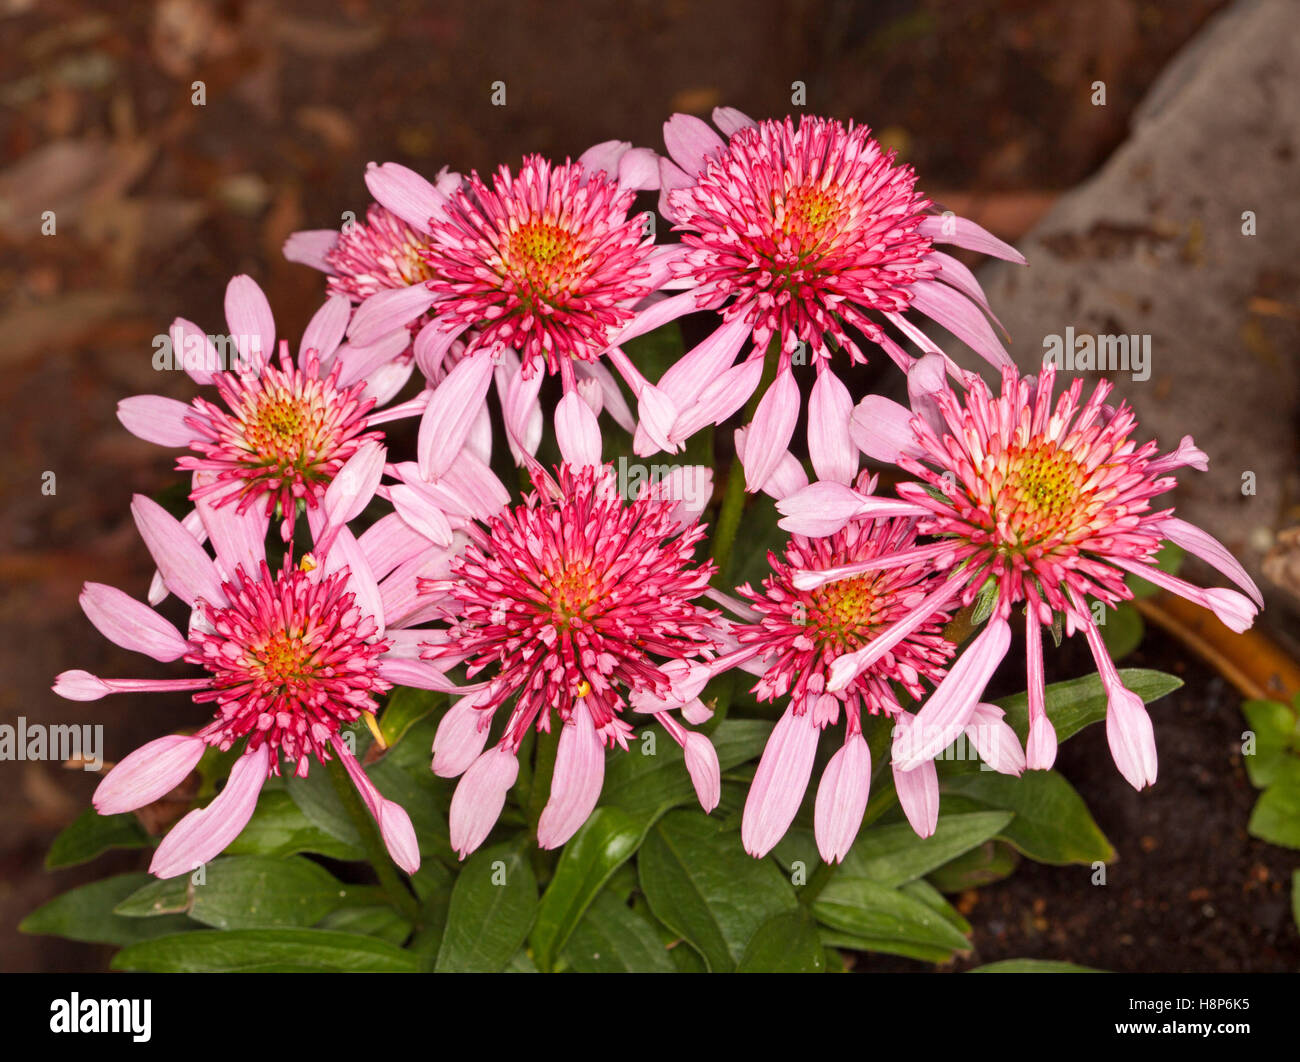 Cluster of stunning vivid pink flowers & green leaves of coneflower Echinacea Double Scoop 'Bubble Gum' on dark brown background Stock Photo